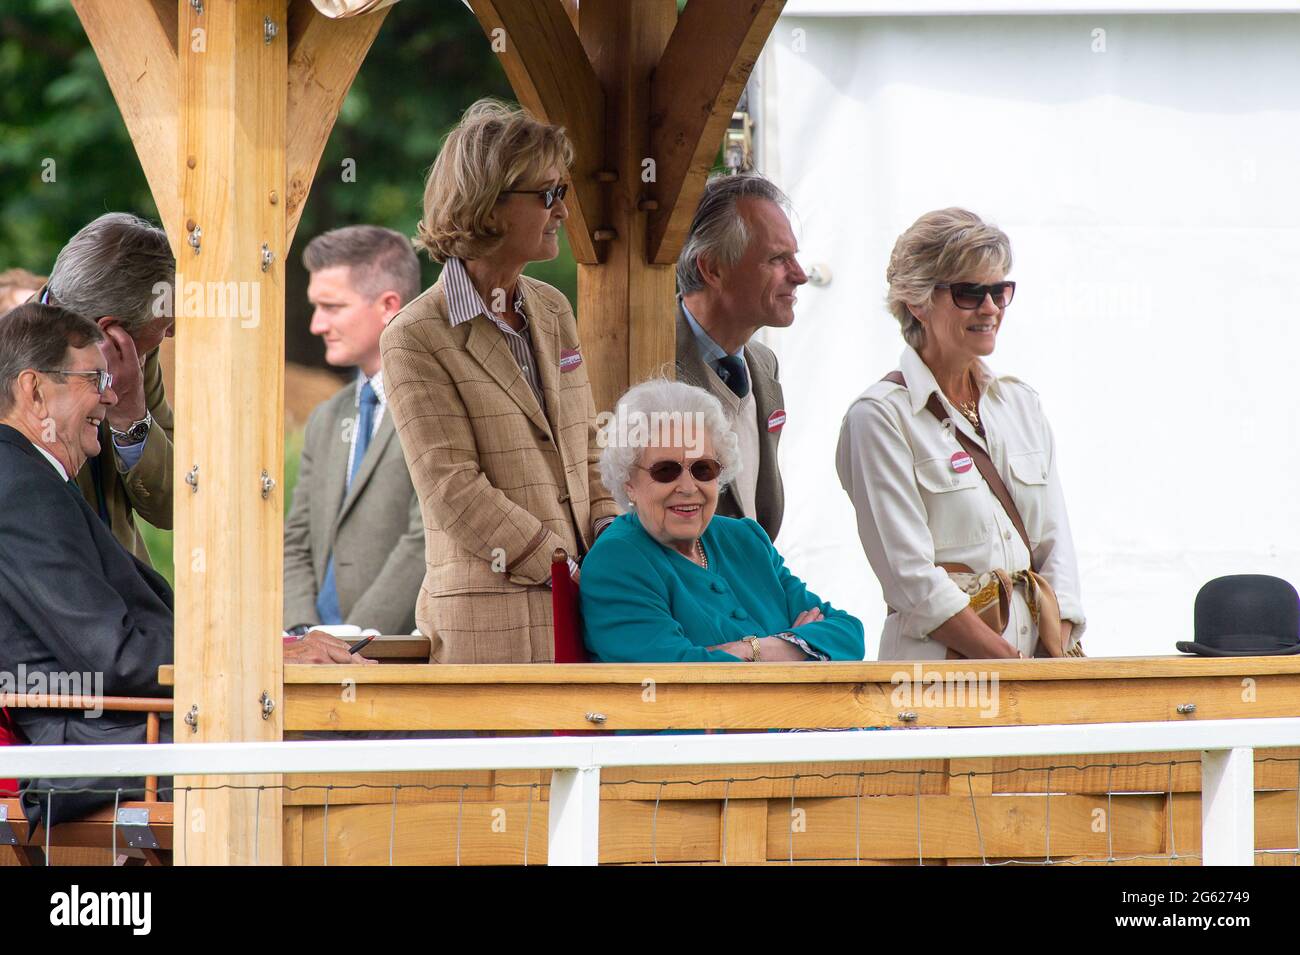 Windsor, Berkshire, UK. 1st July, 2021. After a visit to Scotland this week Queen Elizabeth II was at Royal Windsor Horse Show this afternoon to watch her horses competing. Royal Windsor Horse Show has been taking place since 1943 in the private grounds of Windsor Castle, home to Her Majesty the Queen. Credit: Maureen McLean/Alamy Stock Photo